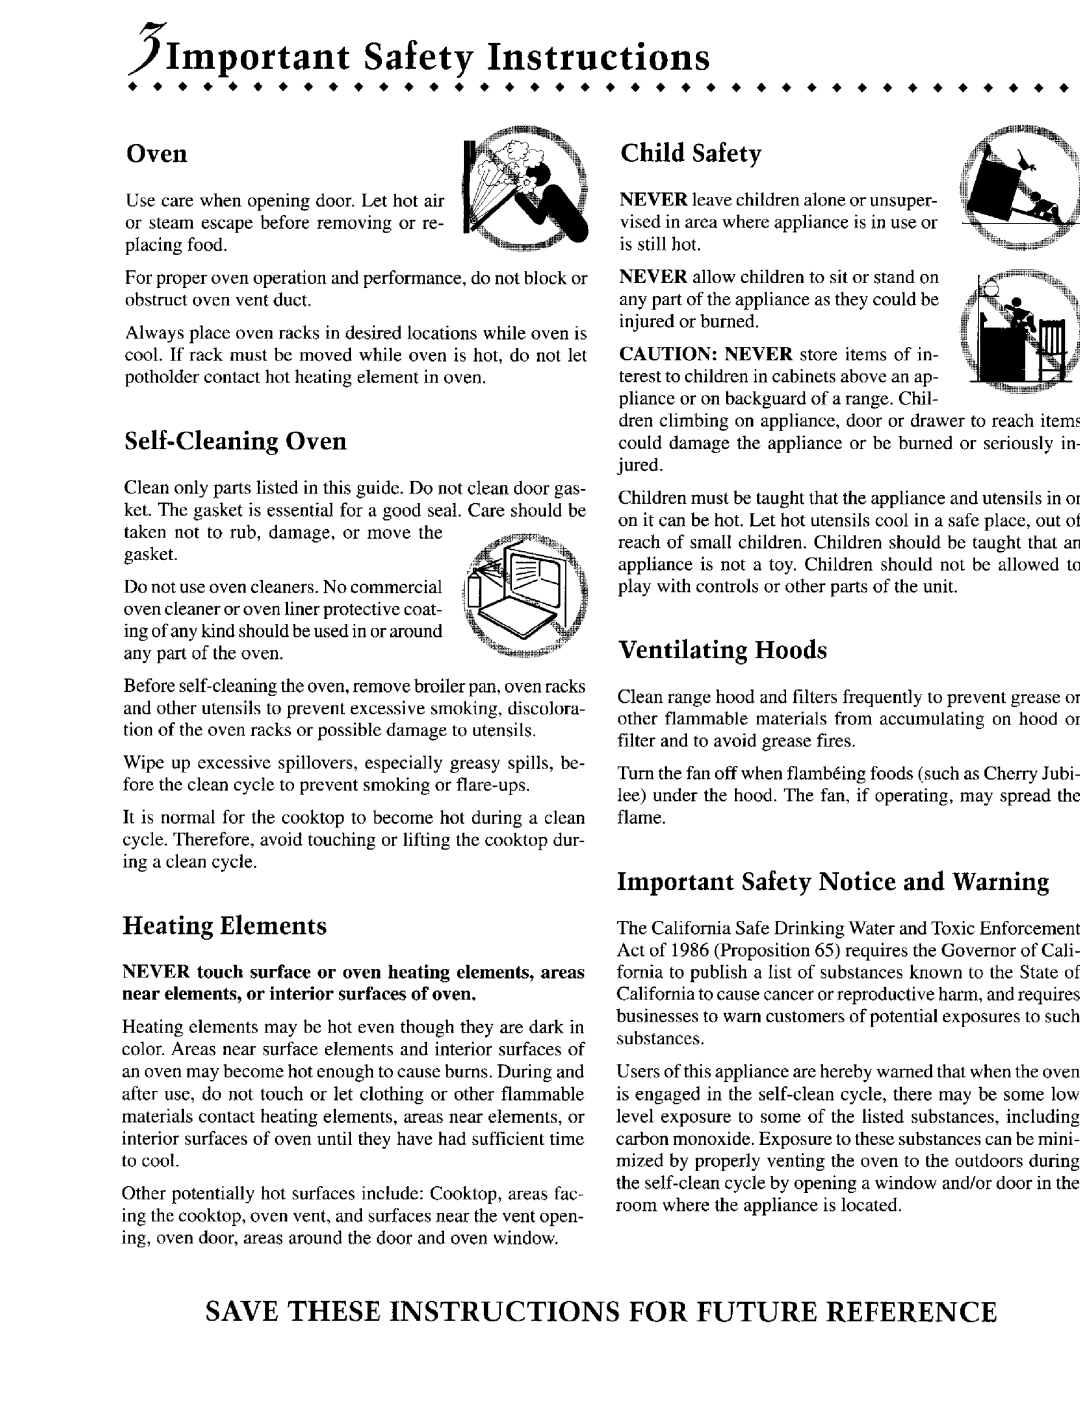 Jenn-Air JER8750, JER8550 Important Safety Instructions, Self-Cleaning Oven, Child Safety, iiii, Ventilating Hoods 